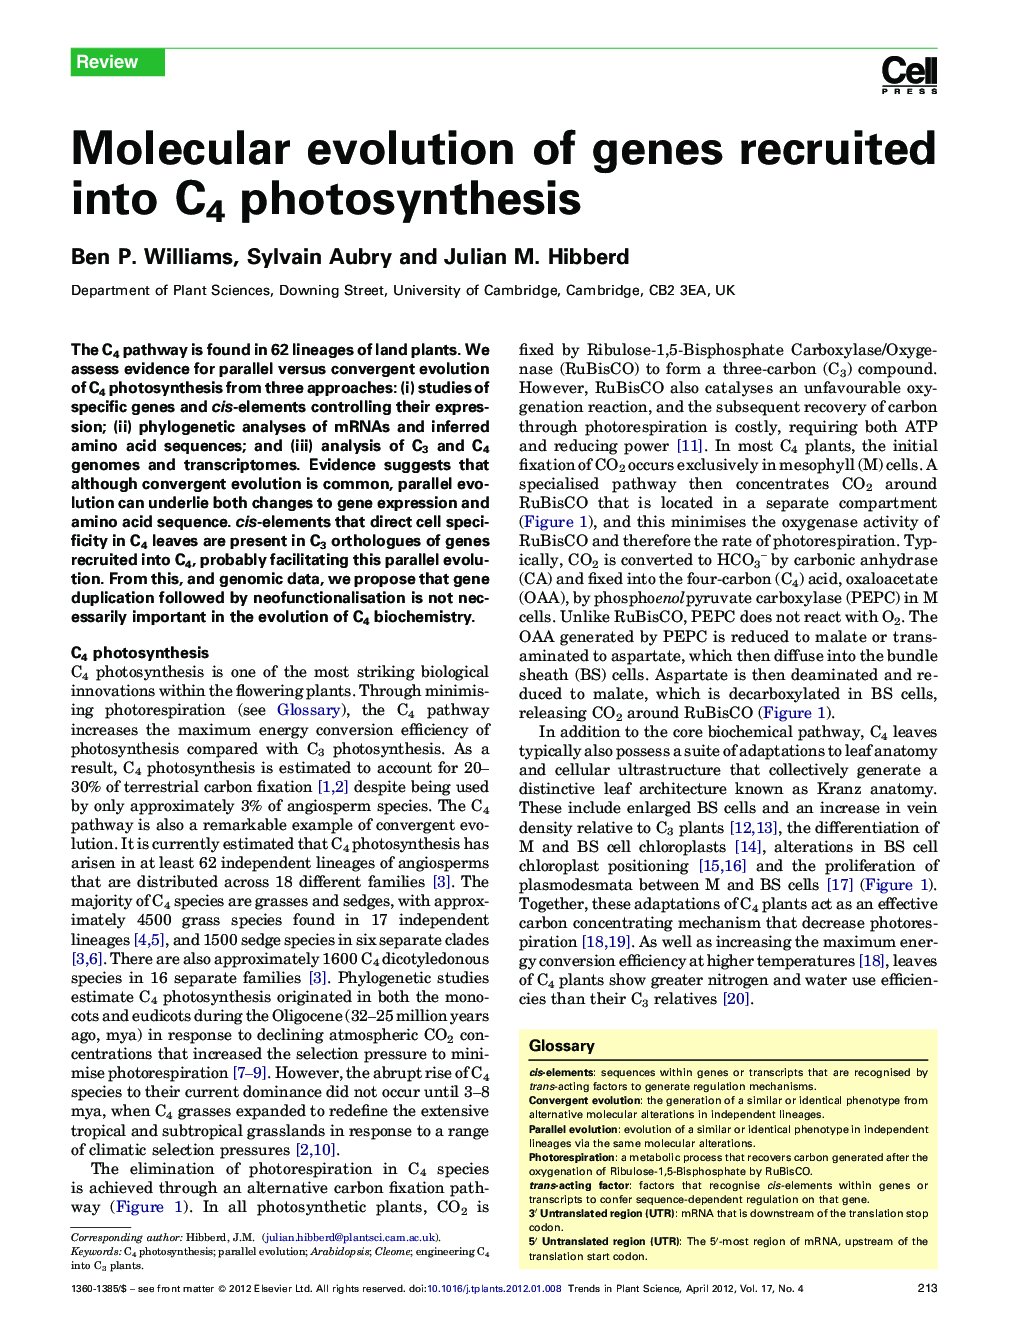 Molecular evolution of genes recruited into C4 photosynthesis